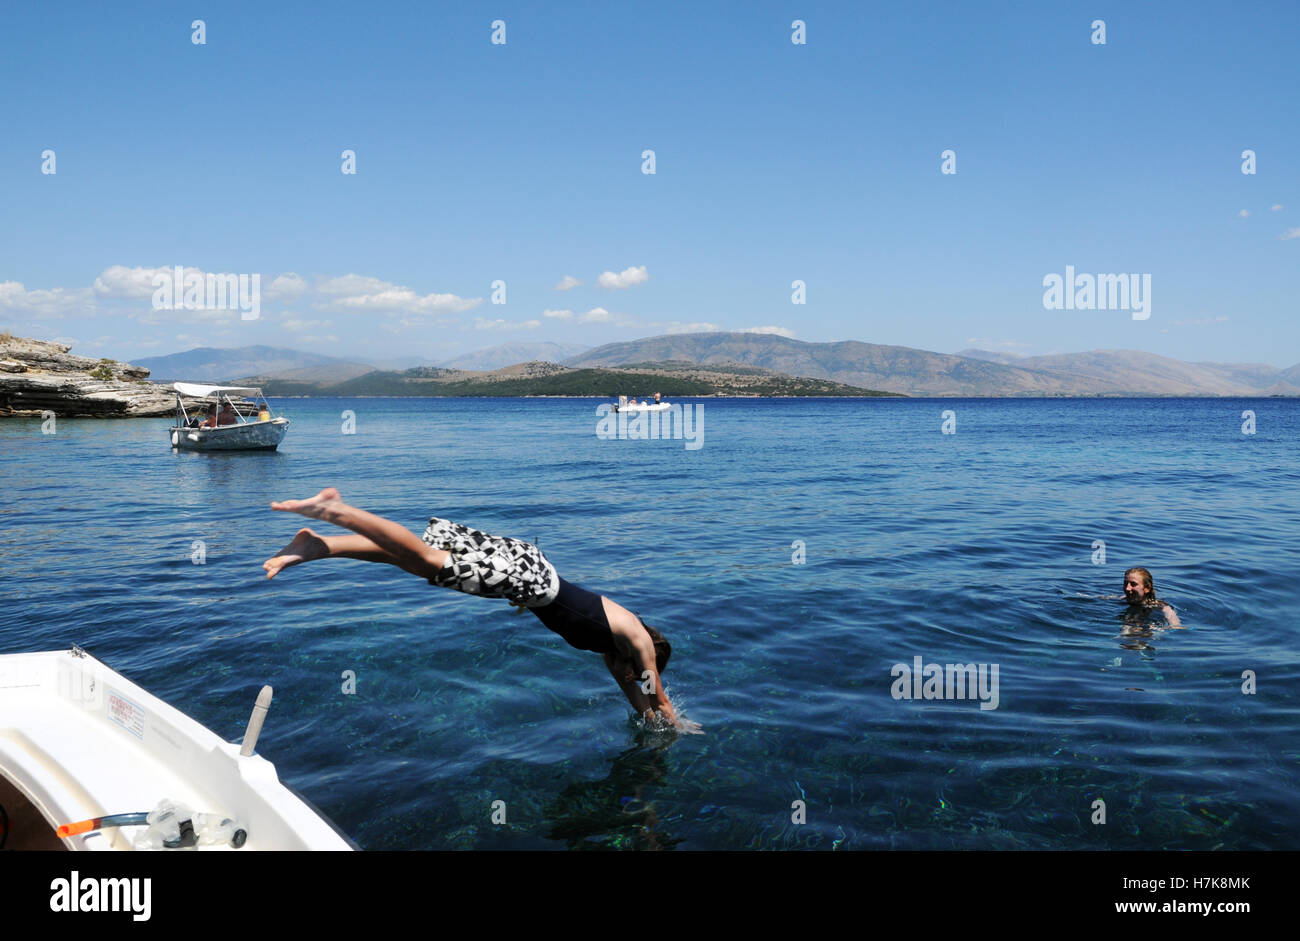 Teenager diving off boat into the sea on holiday in Greece Stock Photo